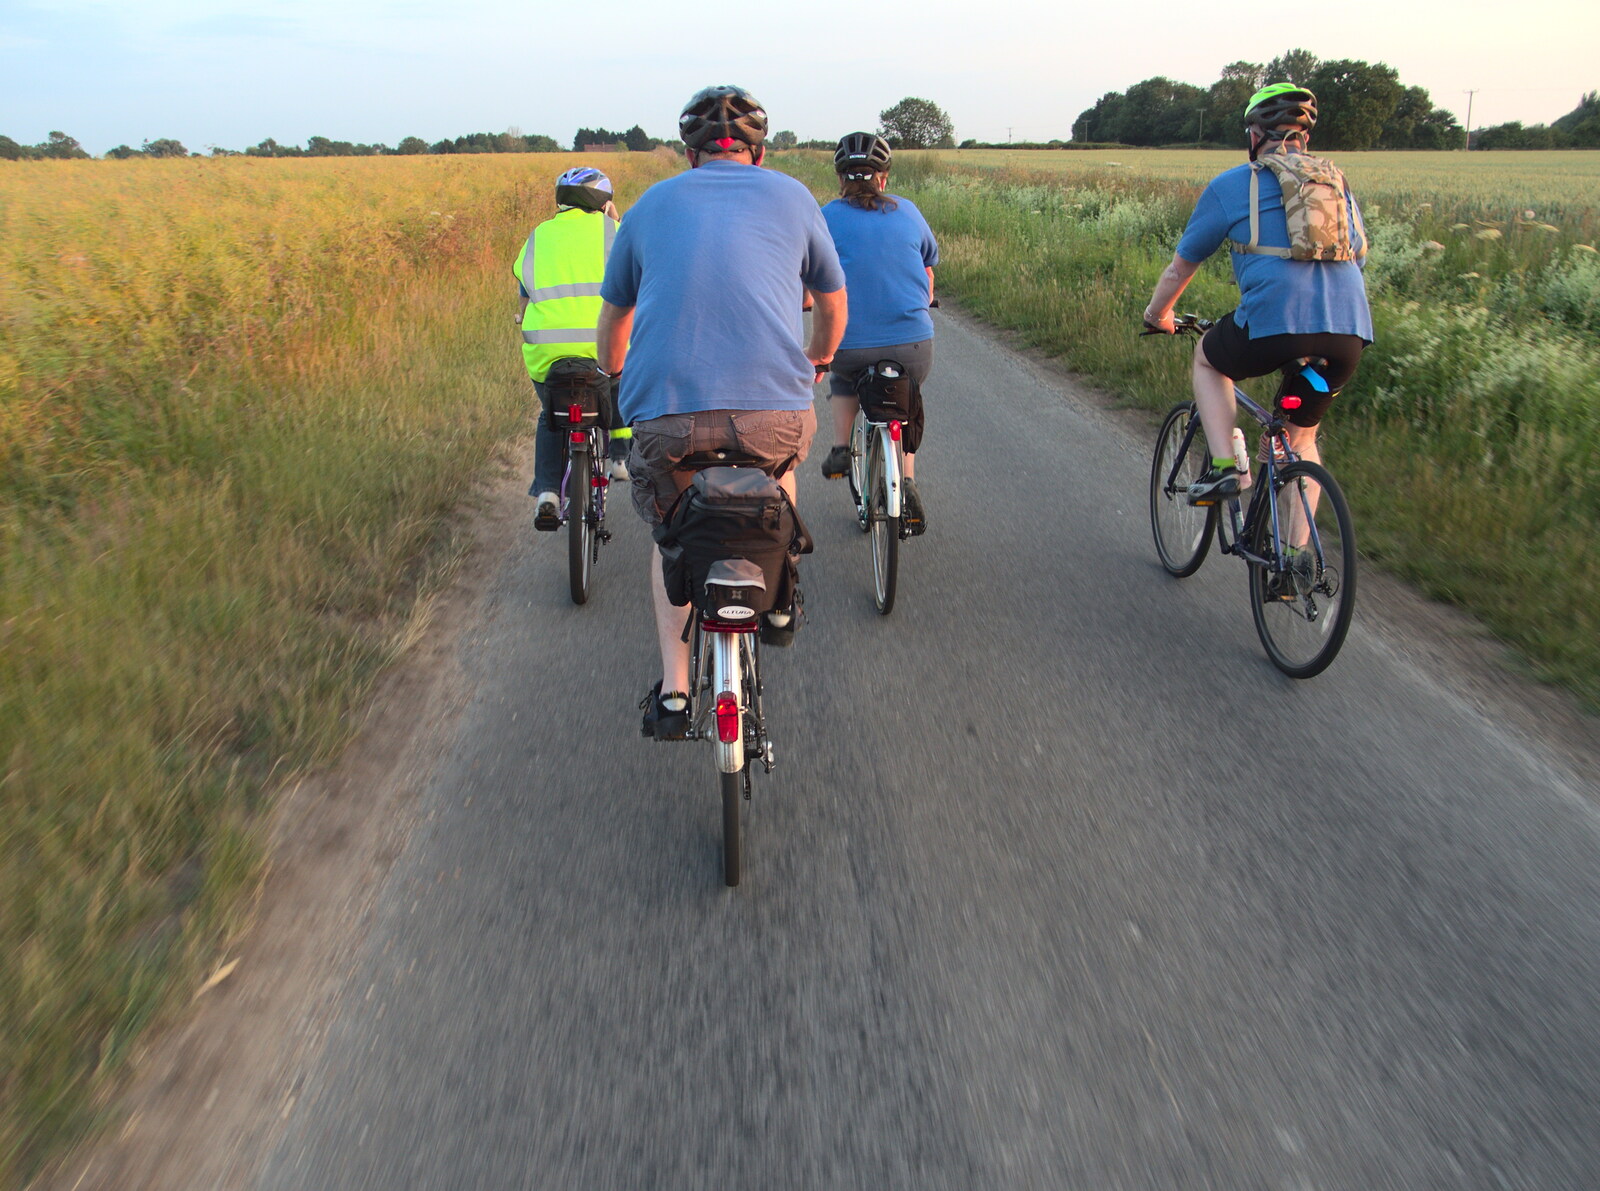 Heading towards the Heywood from The BSSC at The Greyhound, Underpants and Moths - Tibenham, Norfolk - 6th July 2015